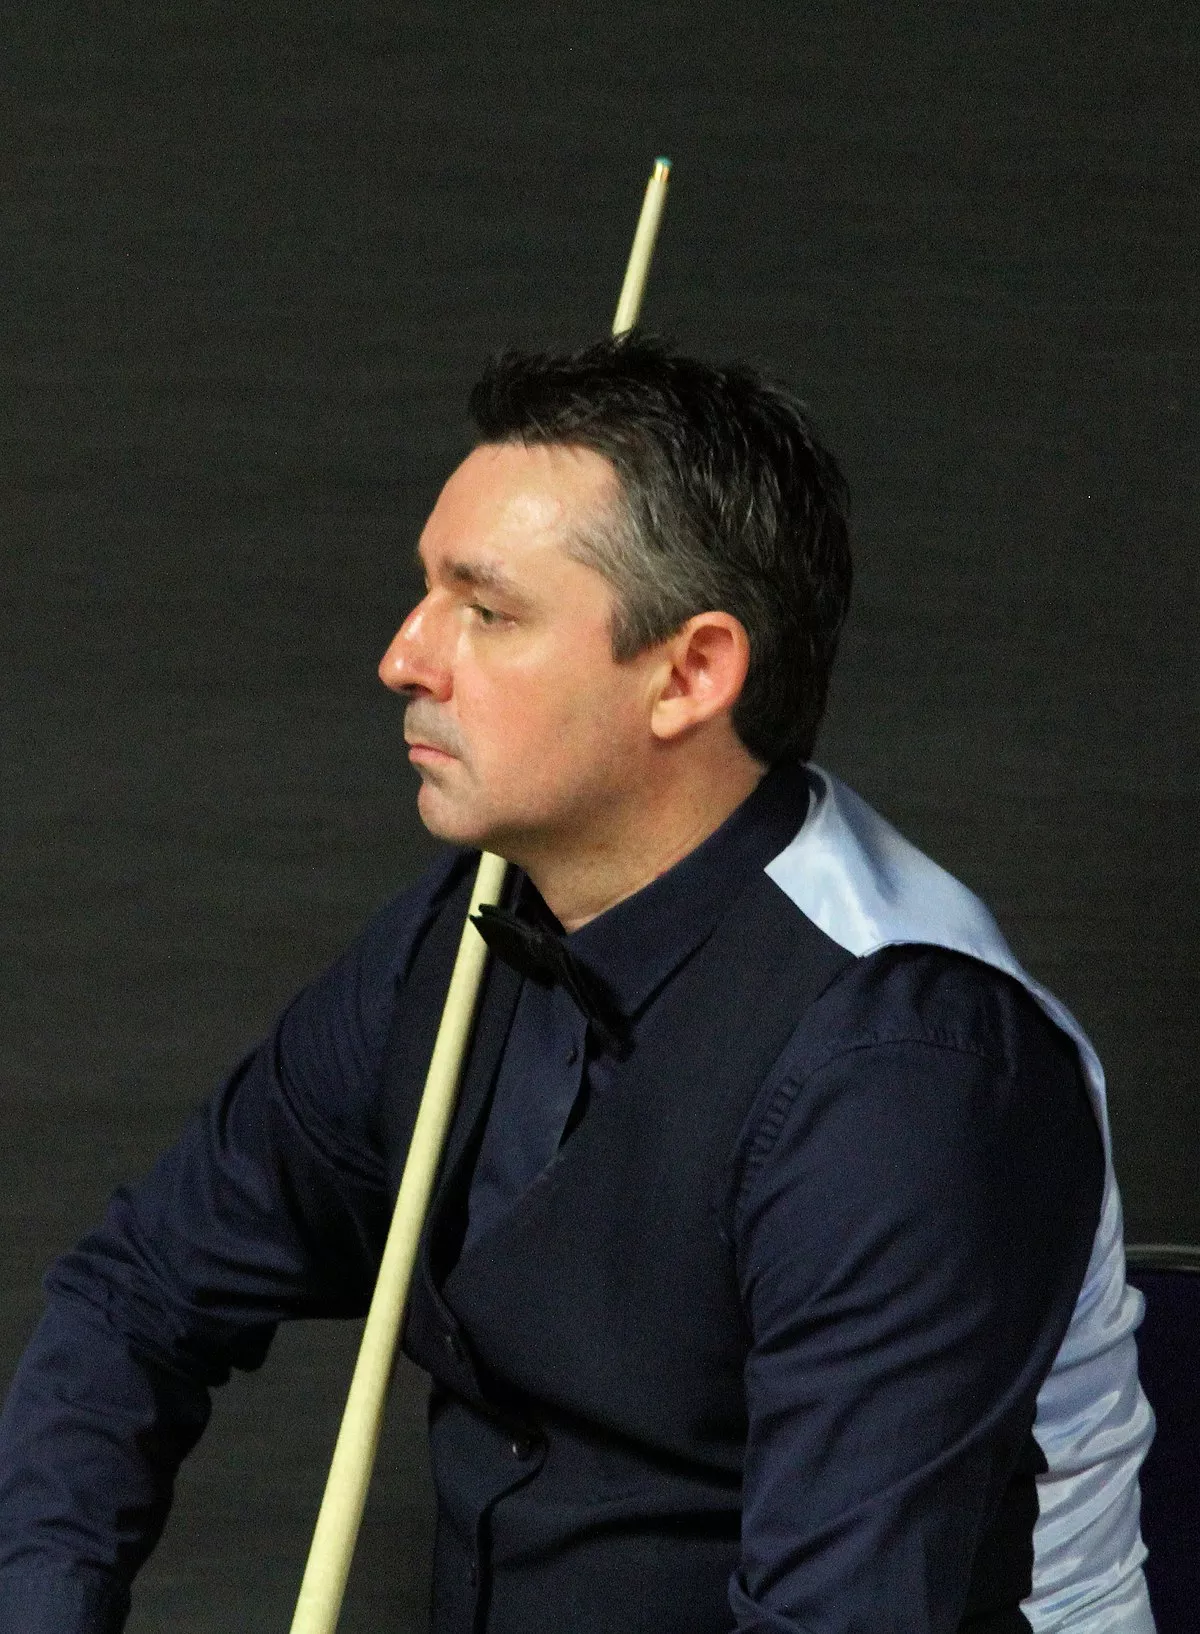 17 Facts About Alan McManus FactSnippet